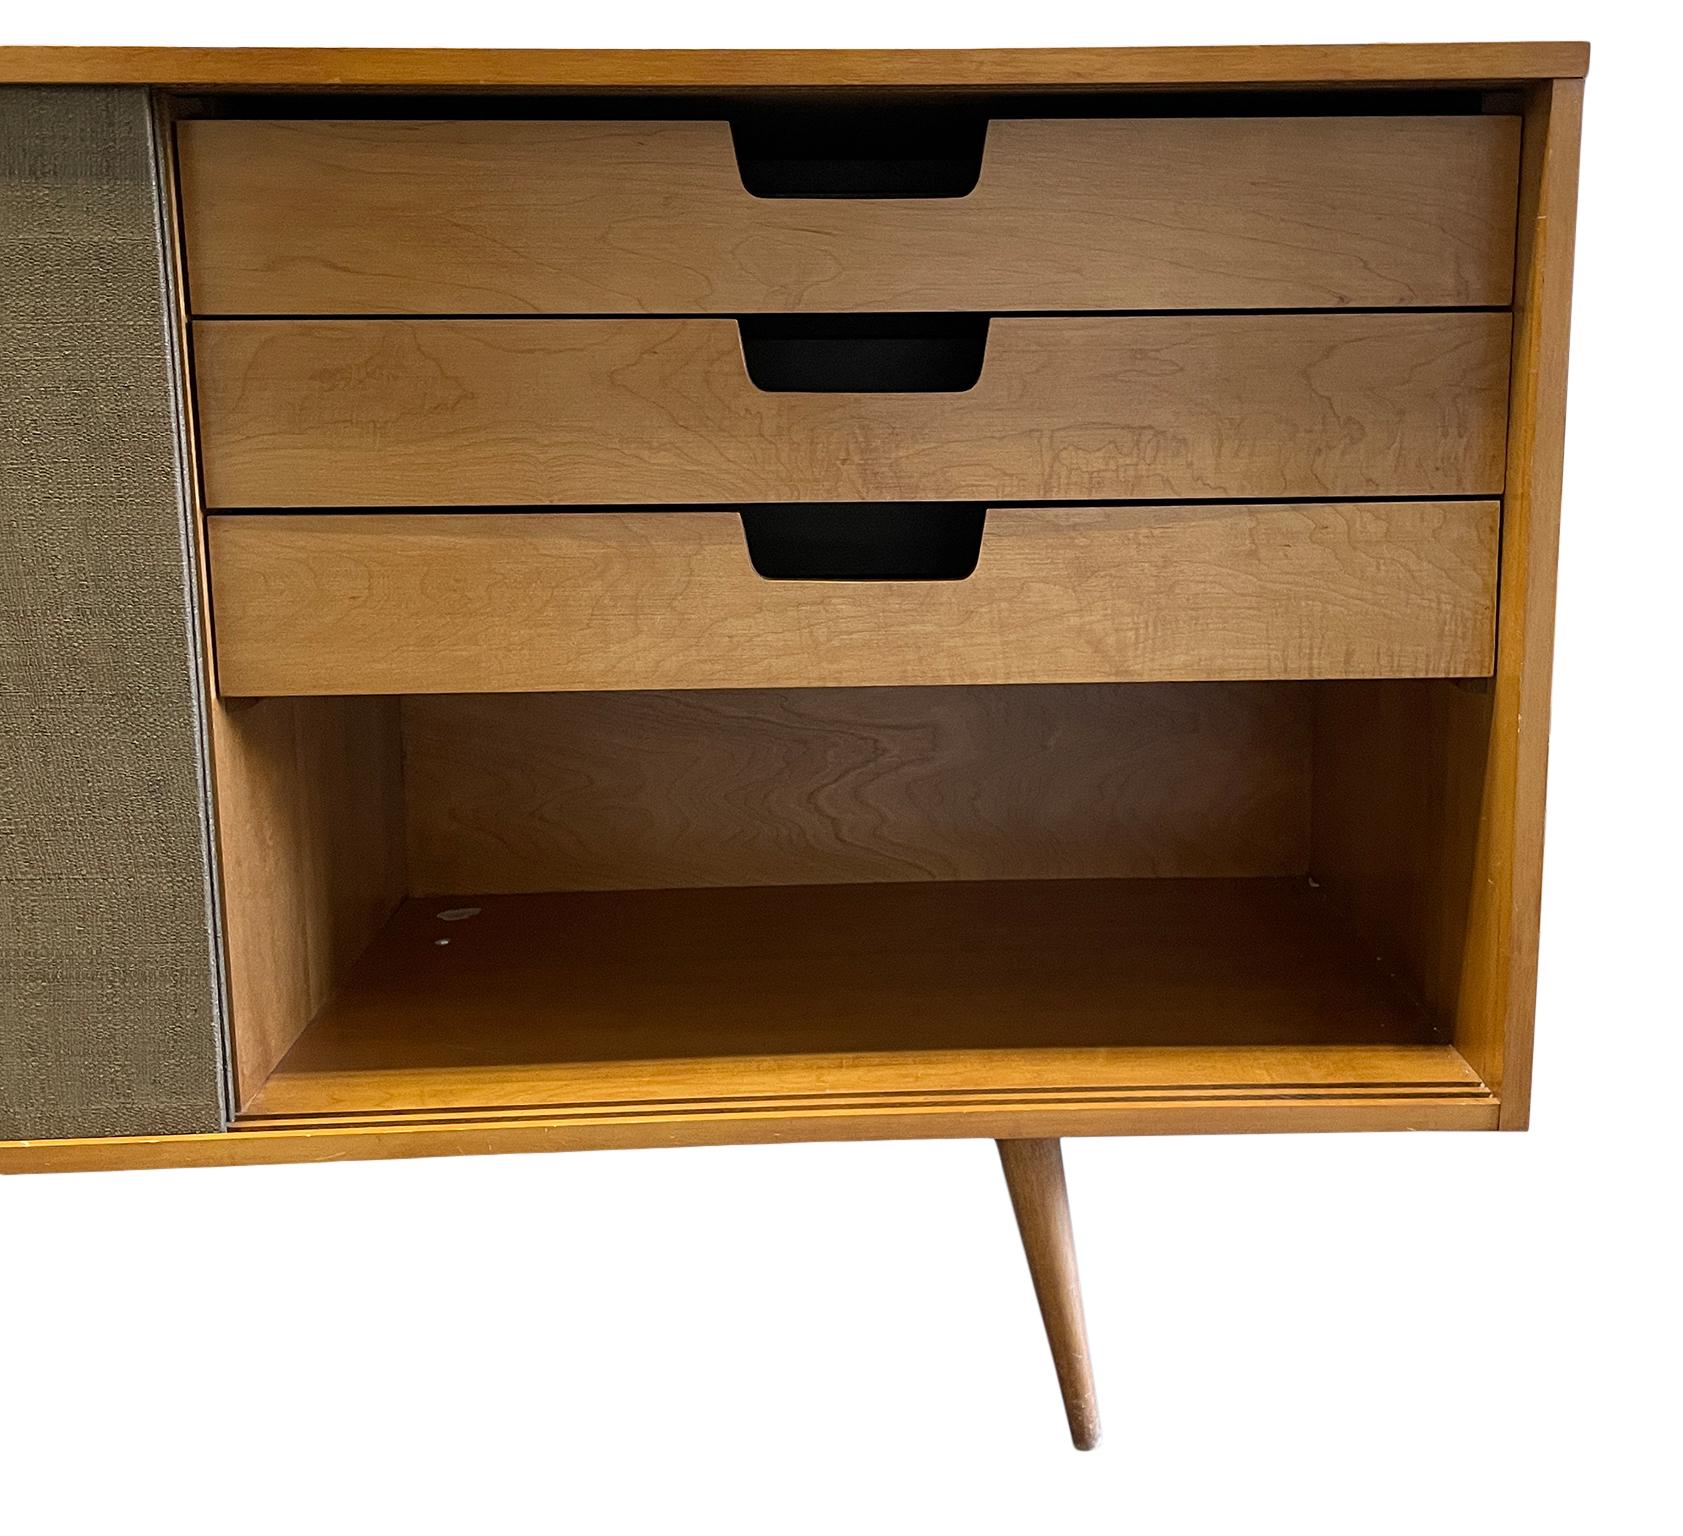 Midcentury Credenza Paul McCobb Planner Group #1514 Blonde Maple For Sale 2